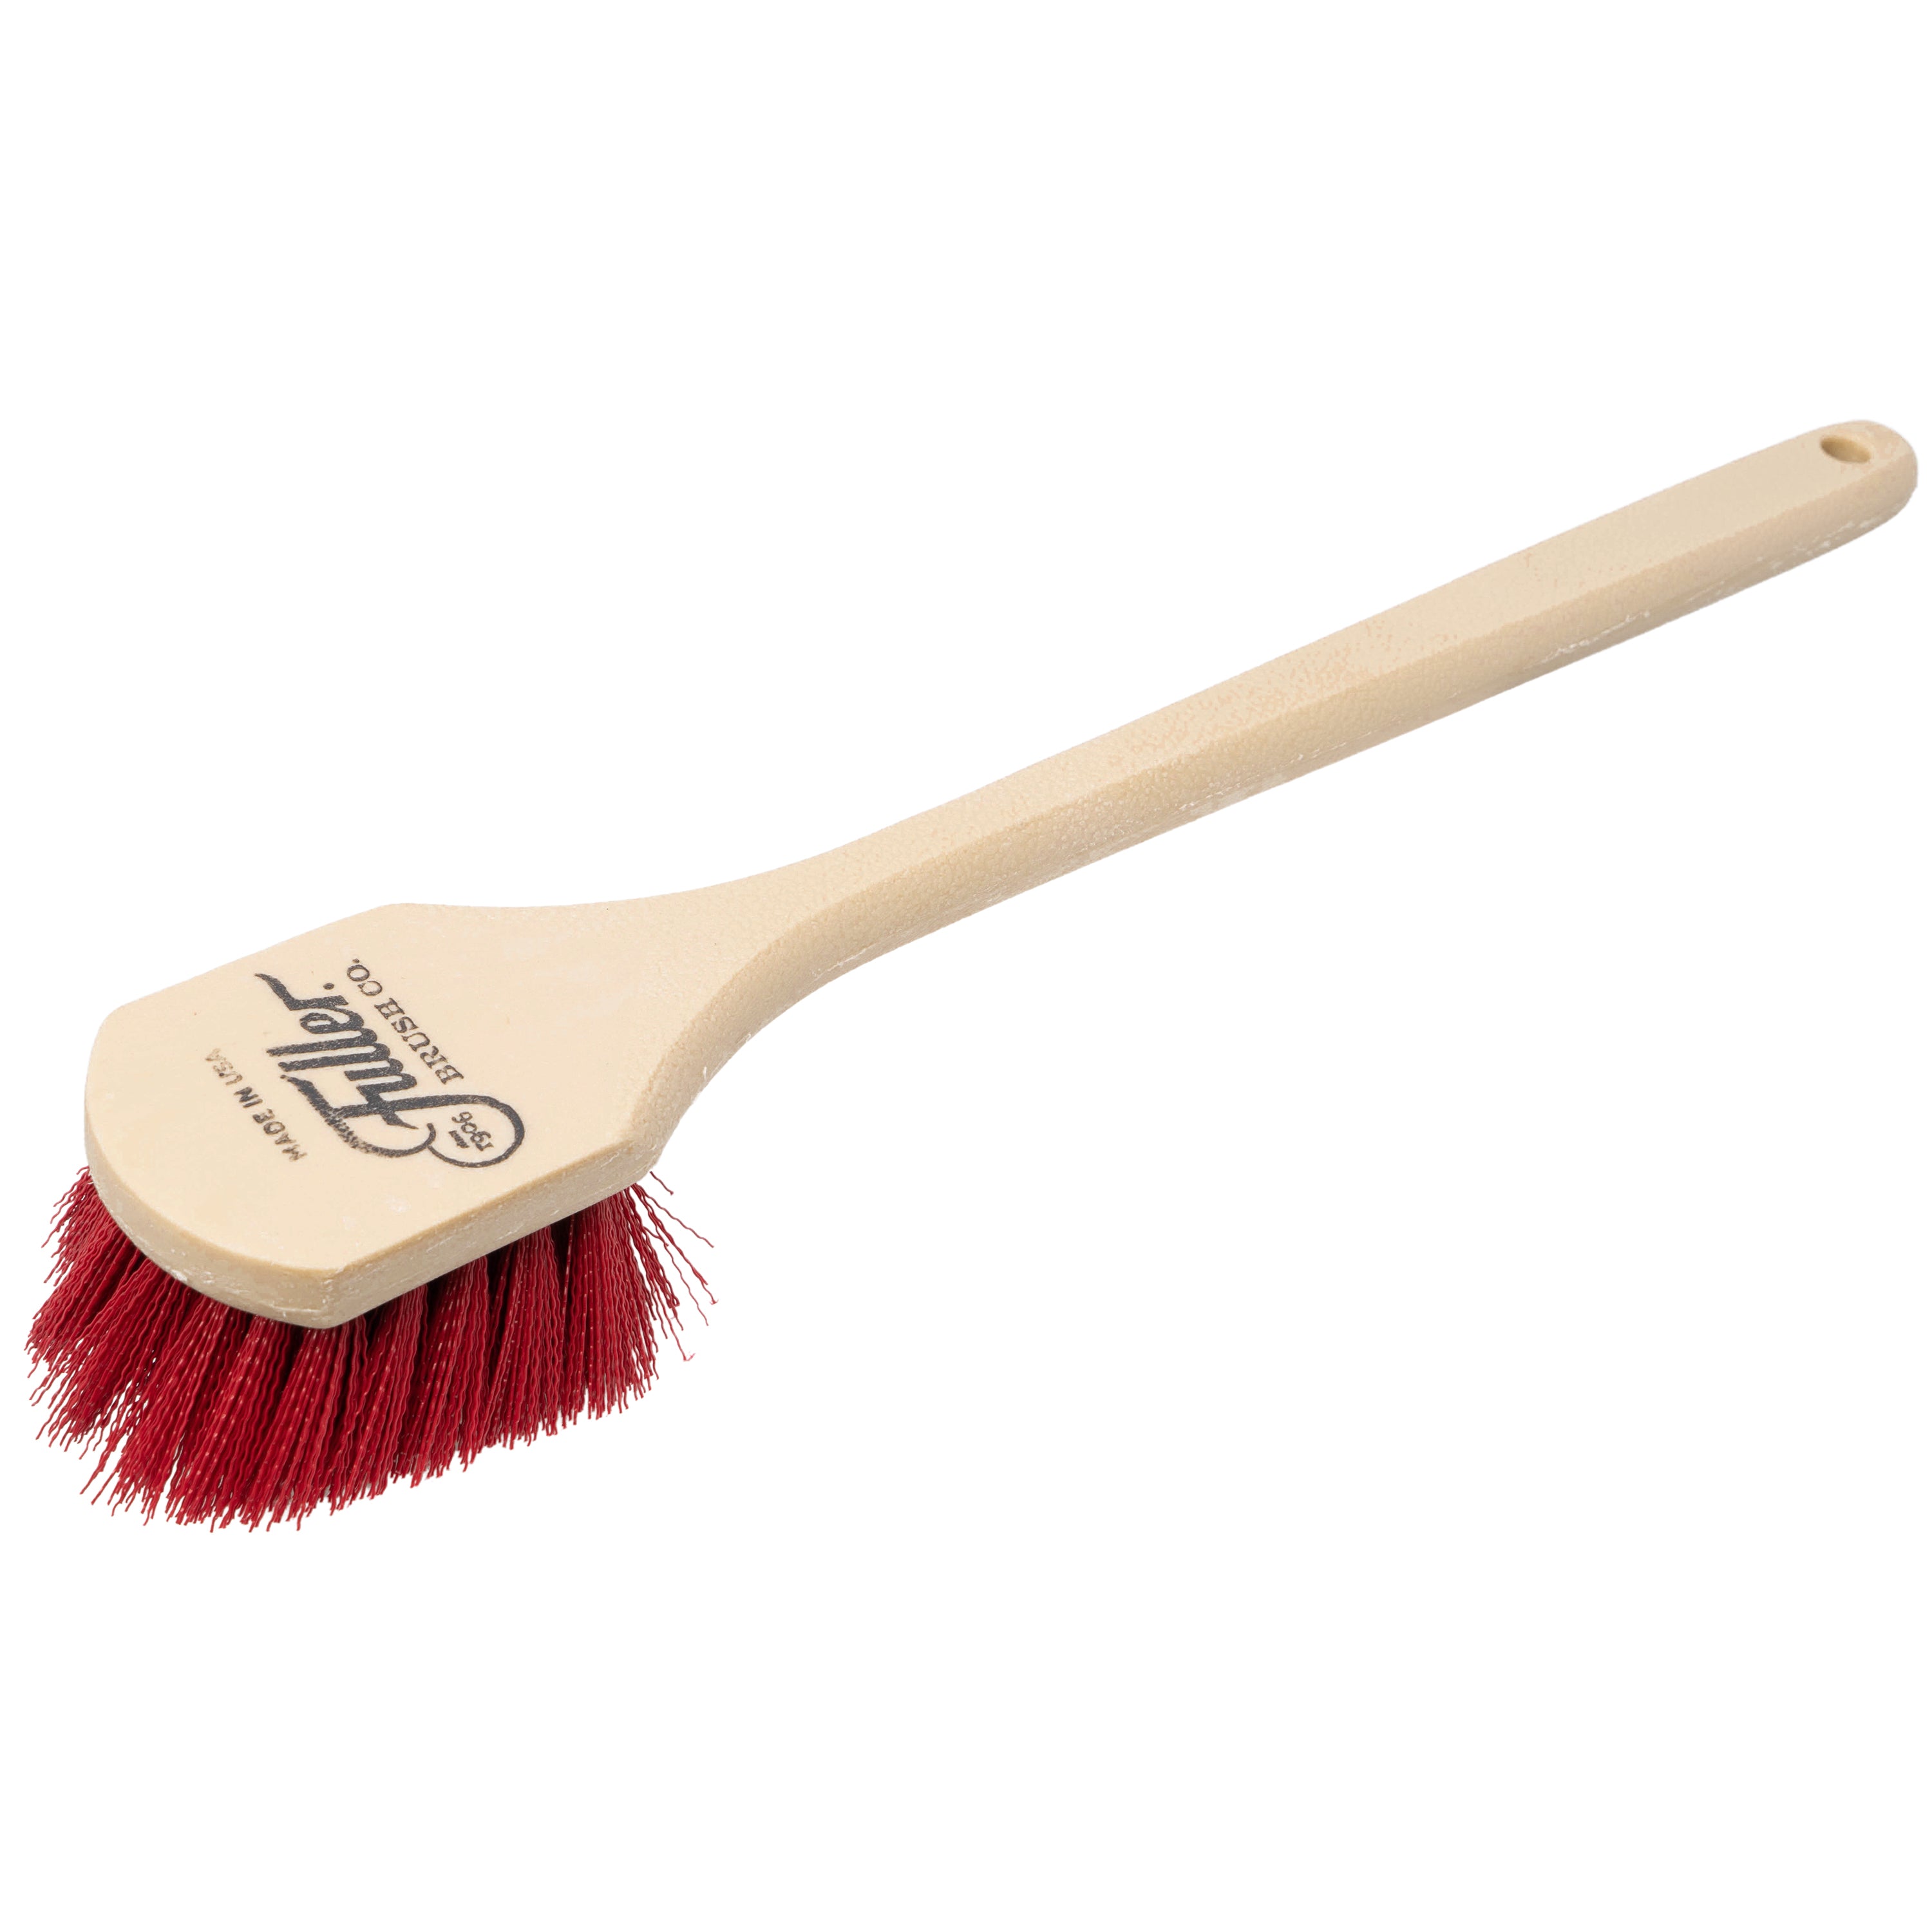 Fuller Brush Easy Hold Scrubby Scrub Brush - Quickly Scrub Stains & Spots on Any Surface - All Purpose Cleaning Scrubber with Ergonomic Looped